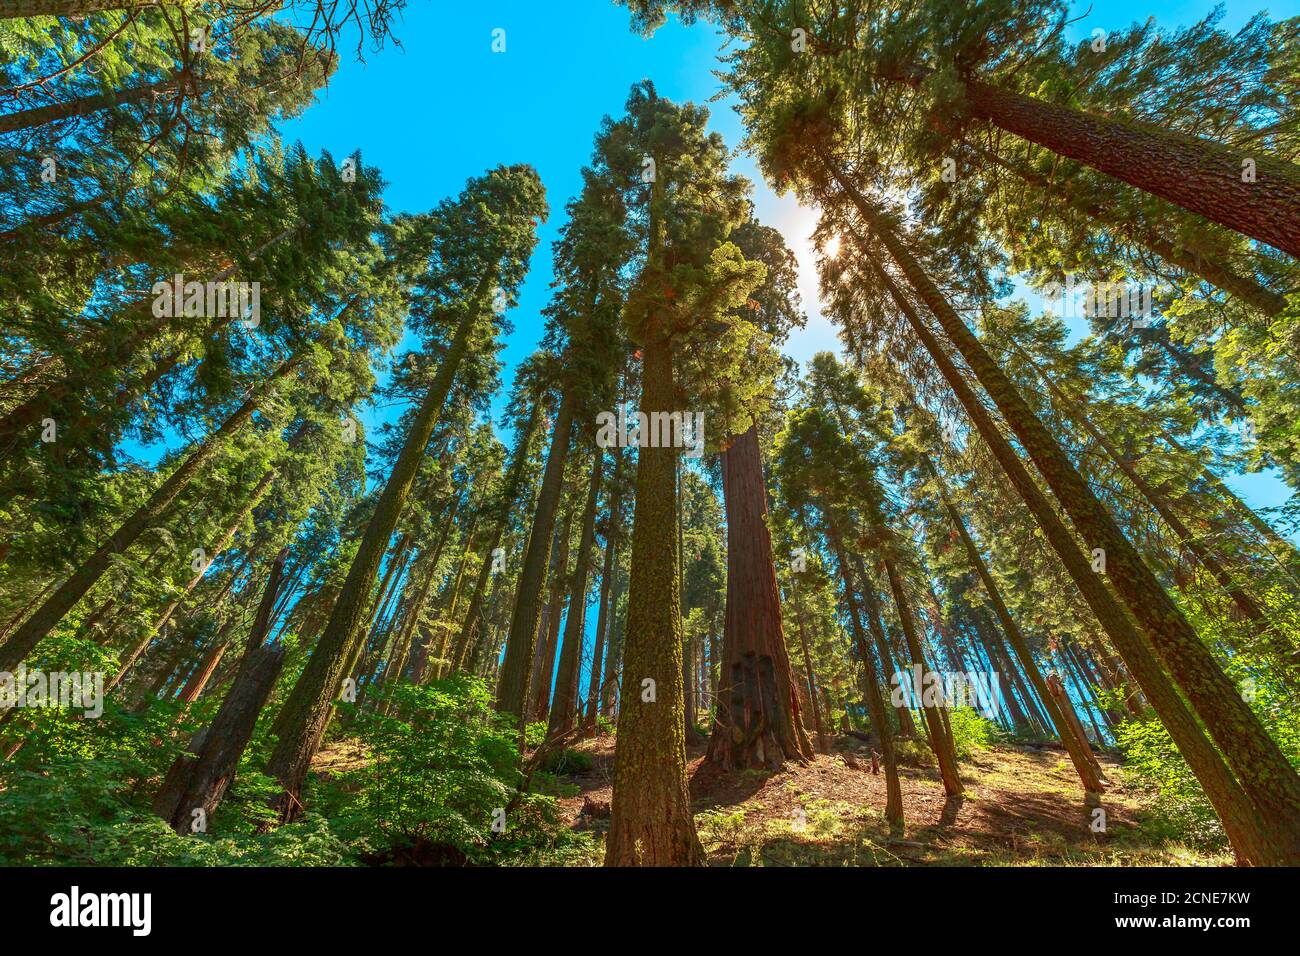 Sequoiadendron giganteum tree species, Sequoia National Park in the Sierra Nevada in California, United States of America Stock Photo